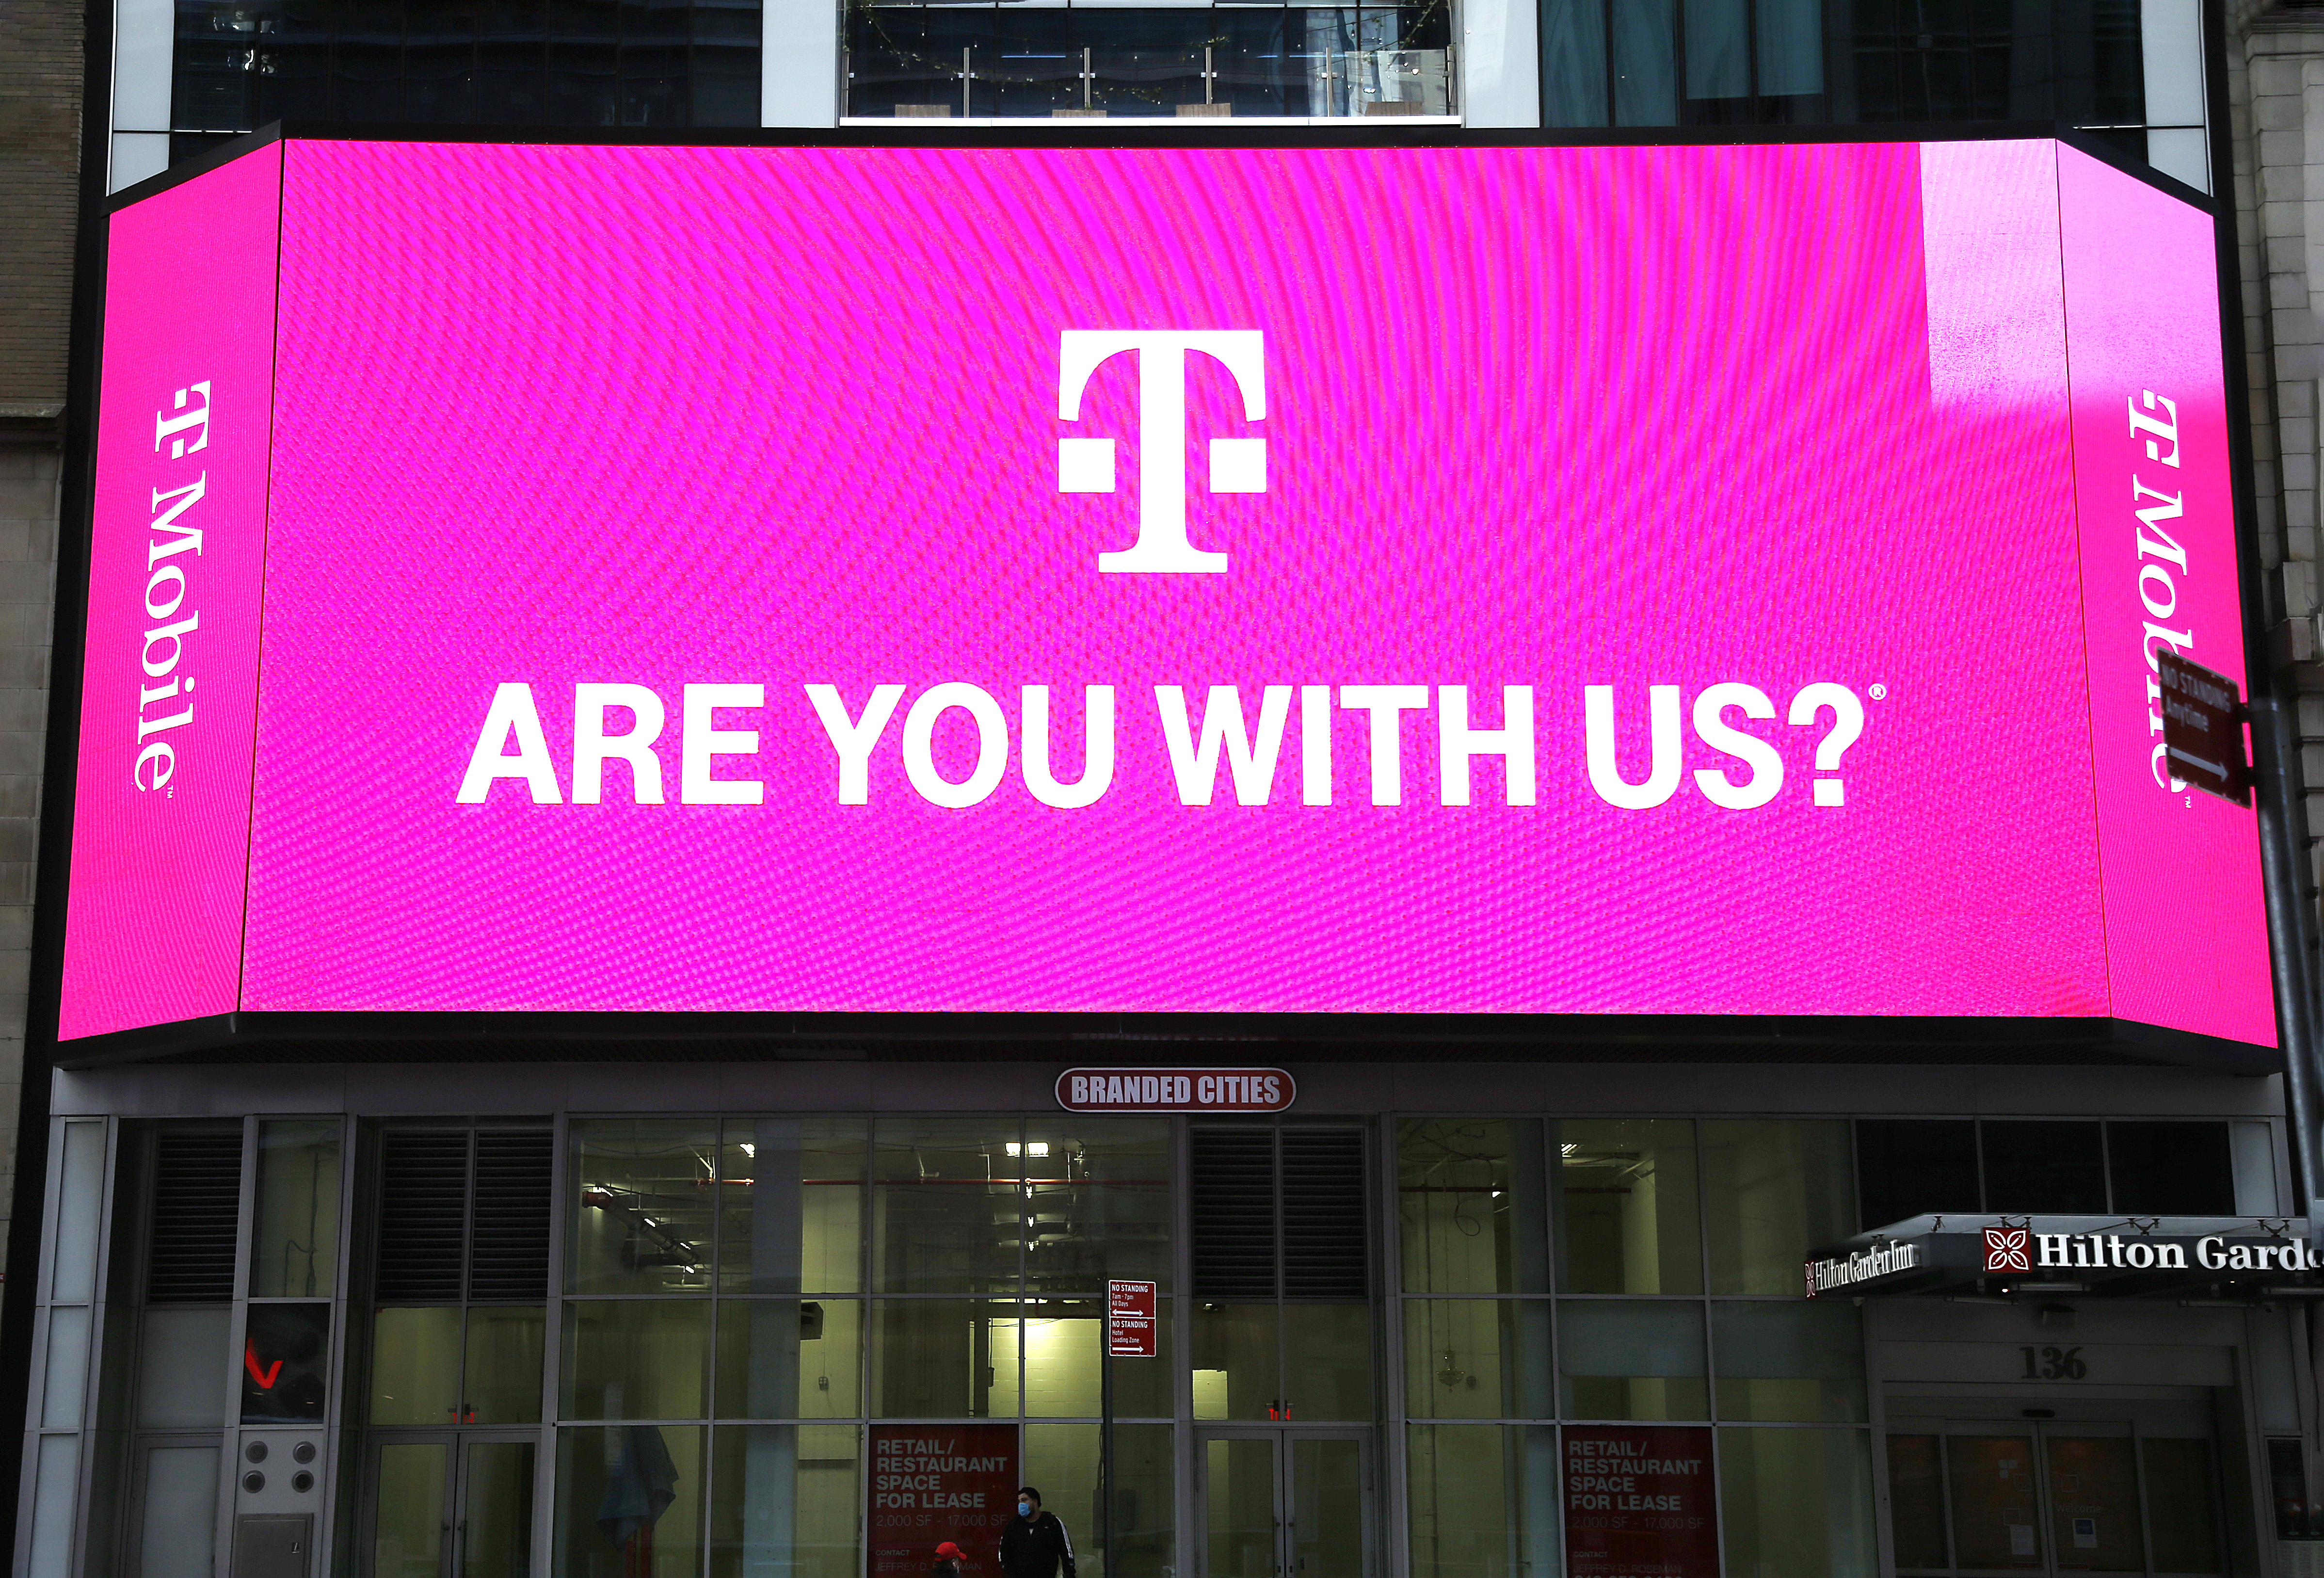 T-Mobile network advertisement seen on a Jumbotron in Times Square reads, “T-Mobile. Are you with us?”